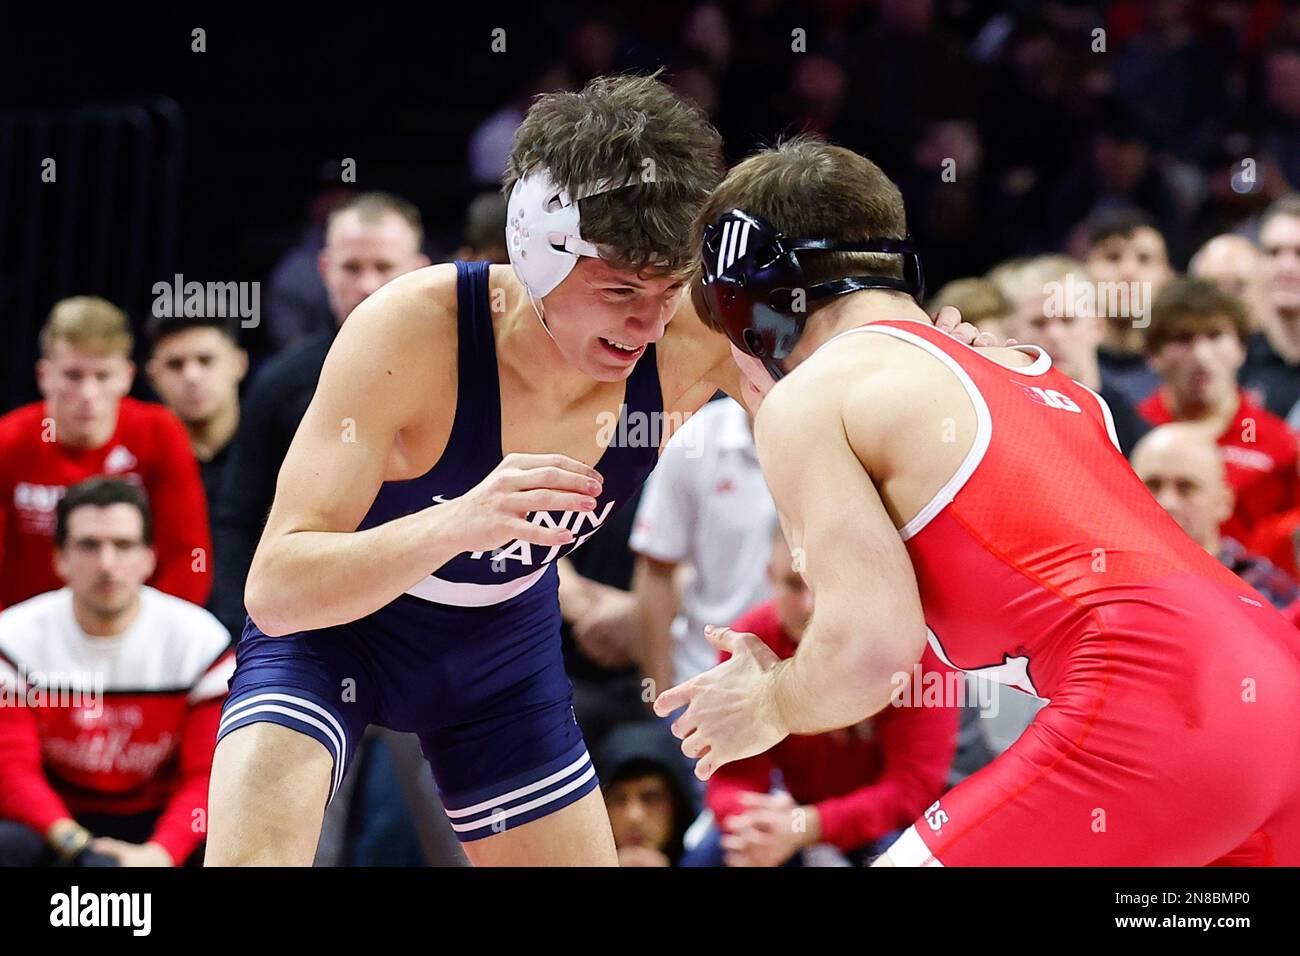 PISCATAWAY, NJ - FEBRUARY 10: #8 Levi Haines of the Penn State Nittany  Lions at 157 lbs. wrestles #33 Andrew Clark of the Rutgers Scarlet Knioghts  at 157 lbs. #8 Levi Haines